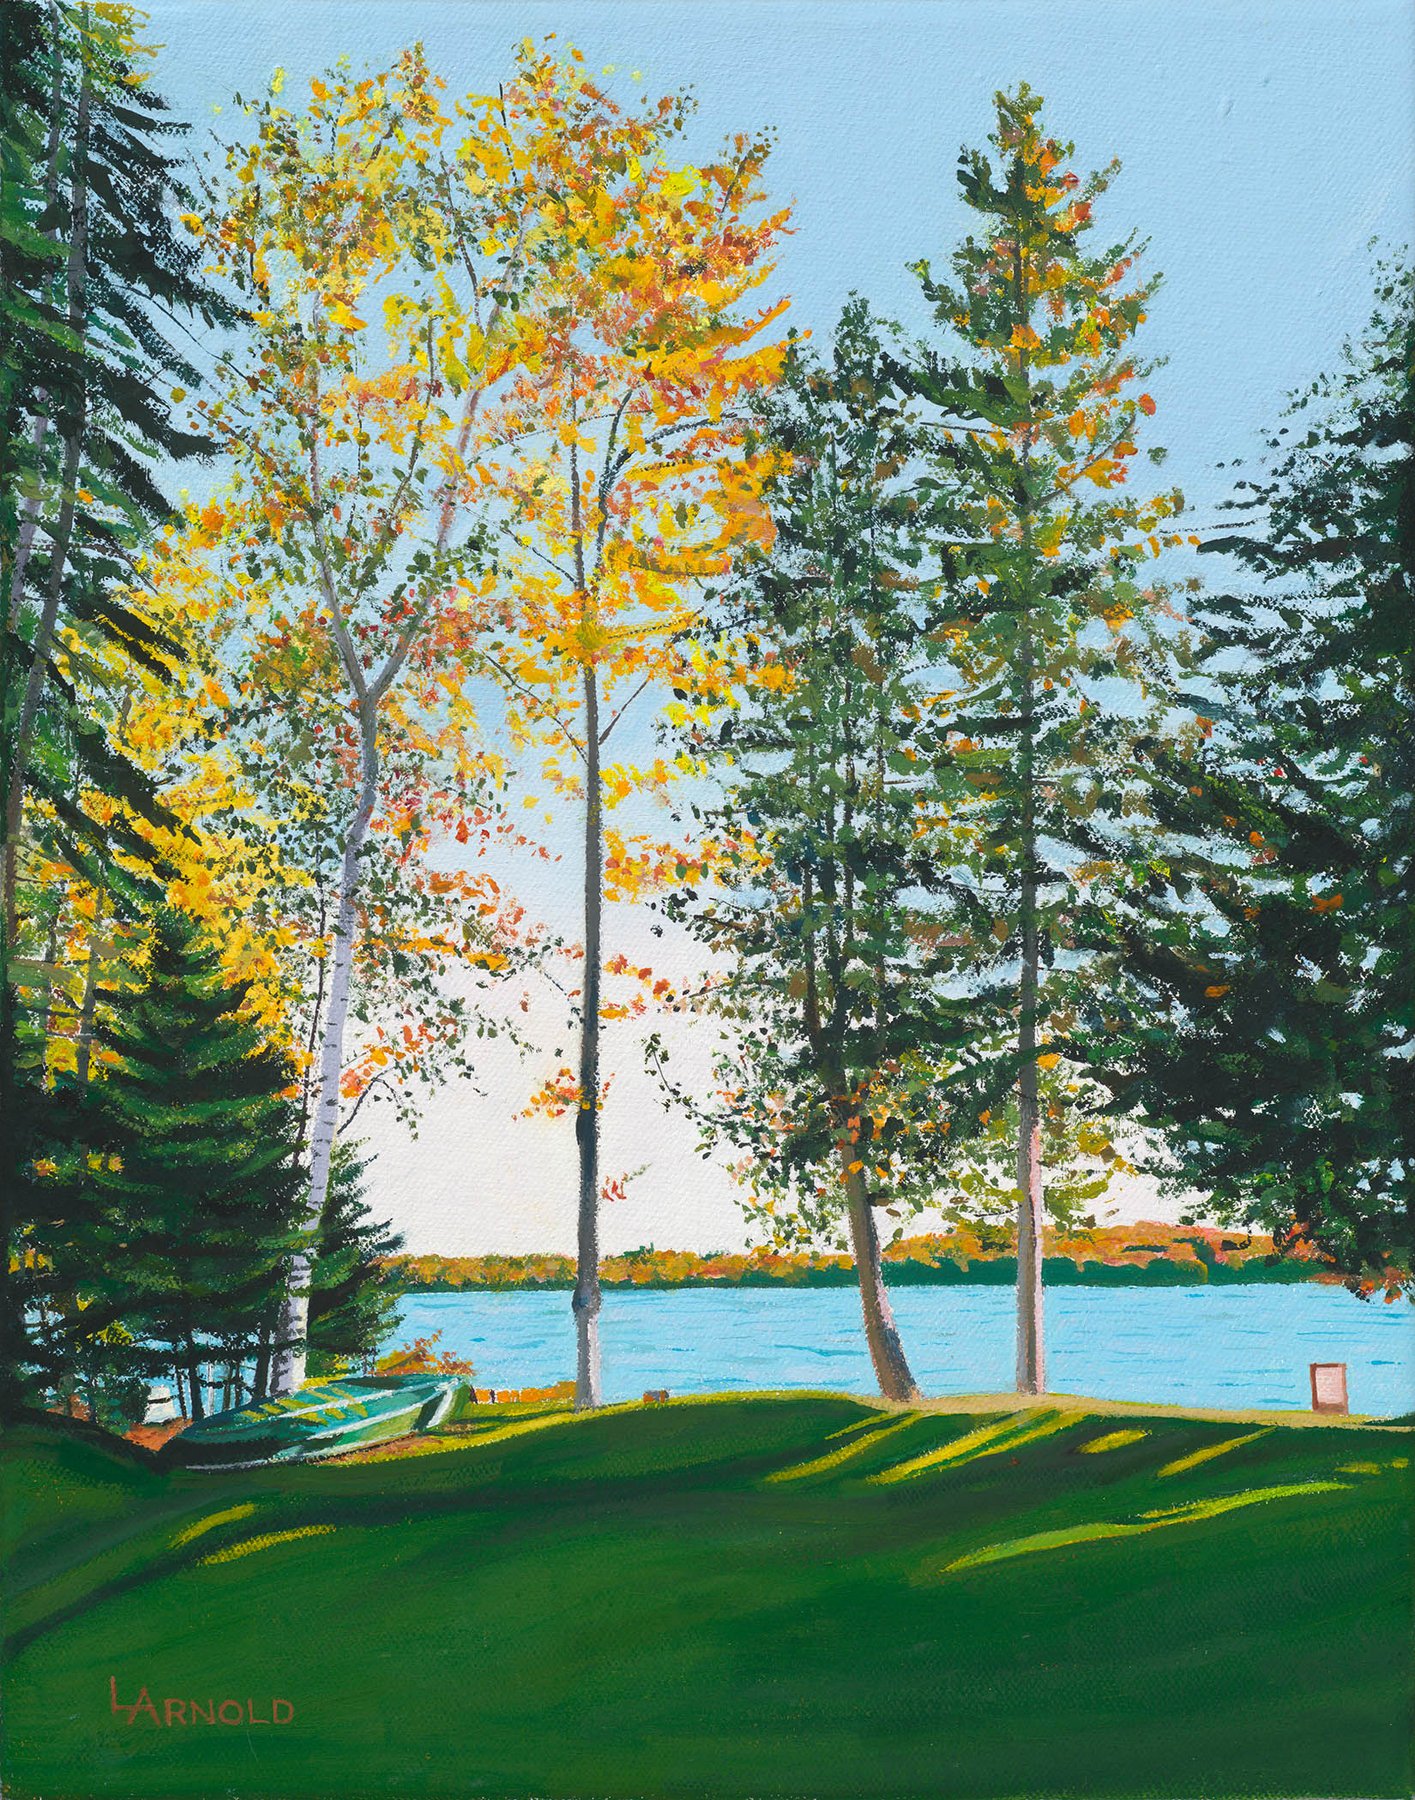 Late Afternoon Lakeside, 14x11